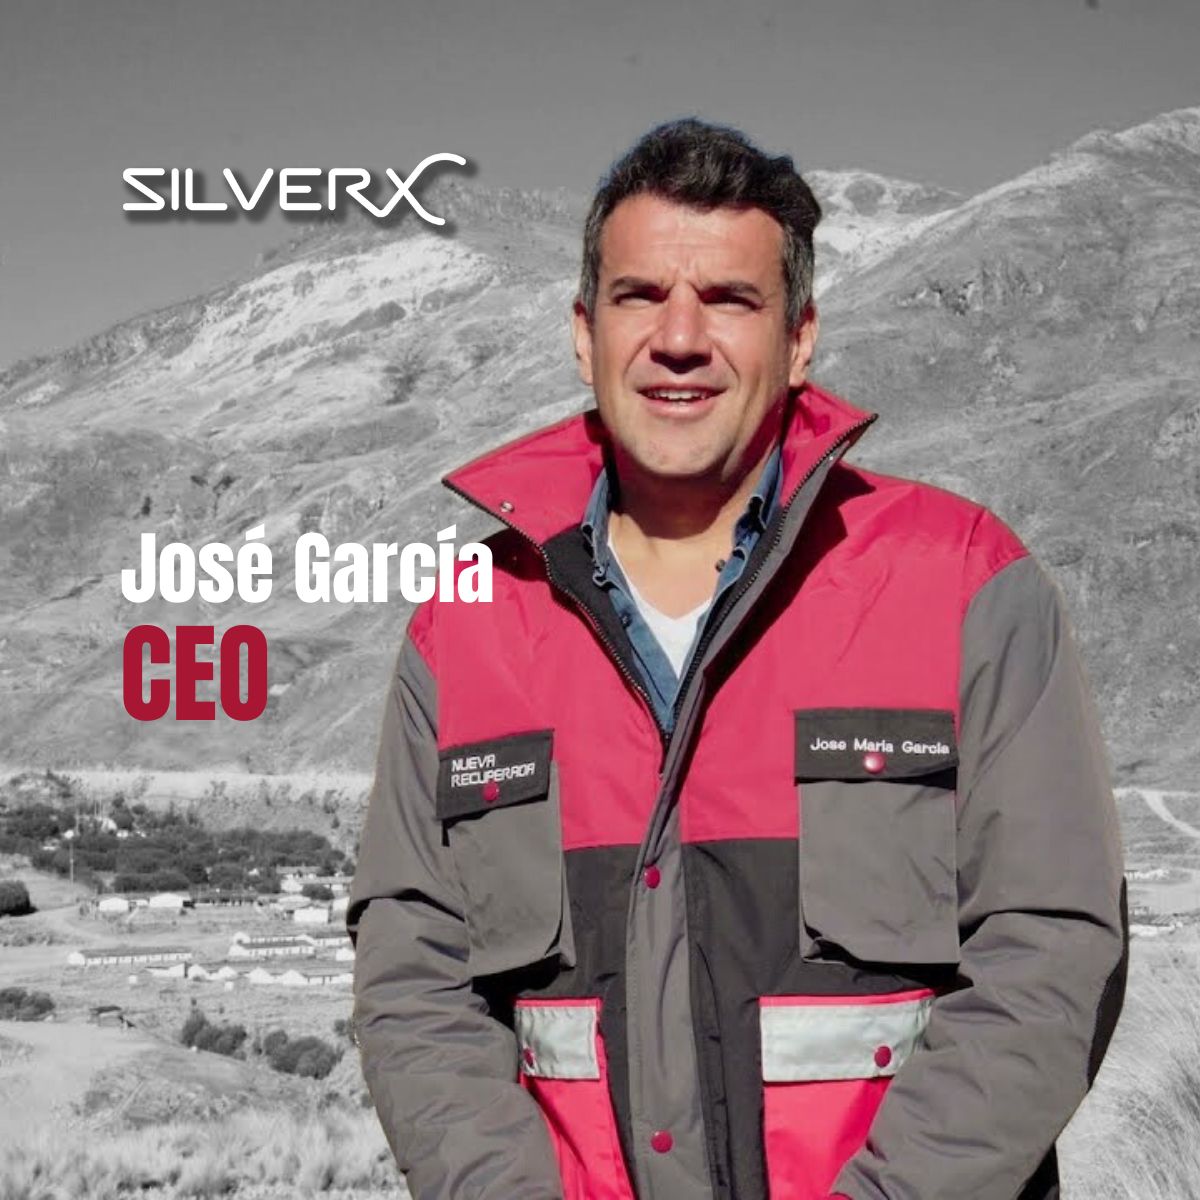 Meet José García, our President and CEO, a #mining engineer and industry veteran with over 20 years of experience. 

José's passion for mining development and exploration has shaped our company's unified outlook.

Read more ➡️ bit.ly/3LVFxdP

#TSXV: $AGX.V
#OTCQB: $AGXPF